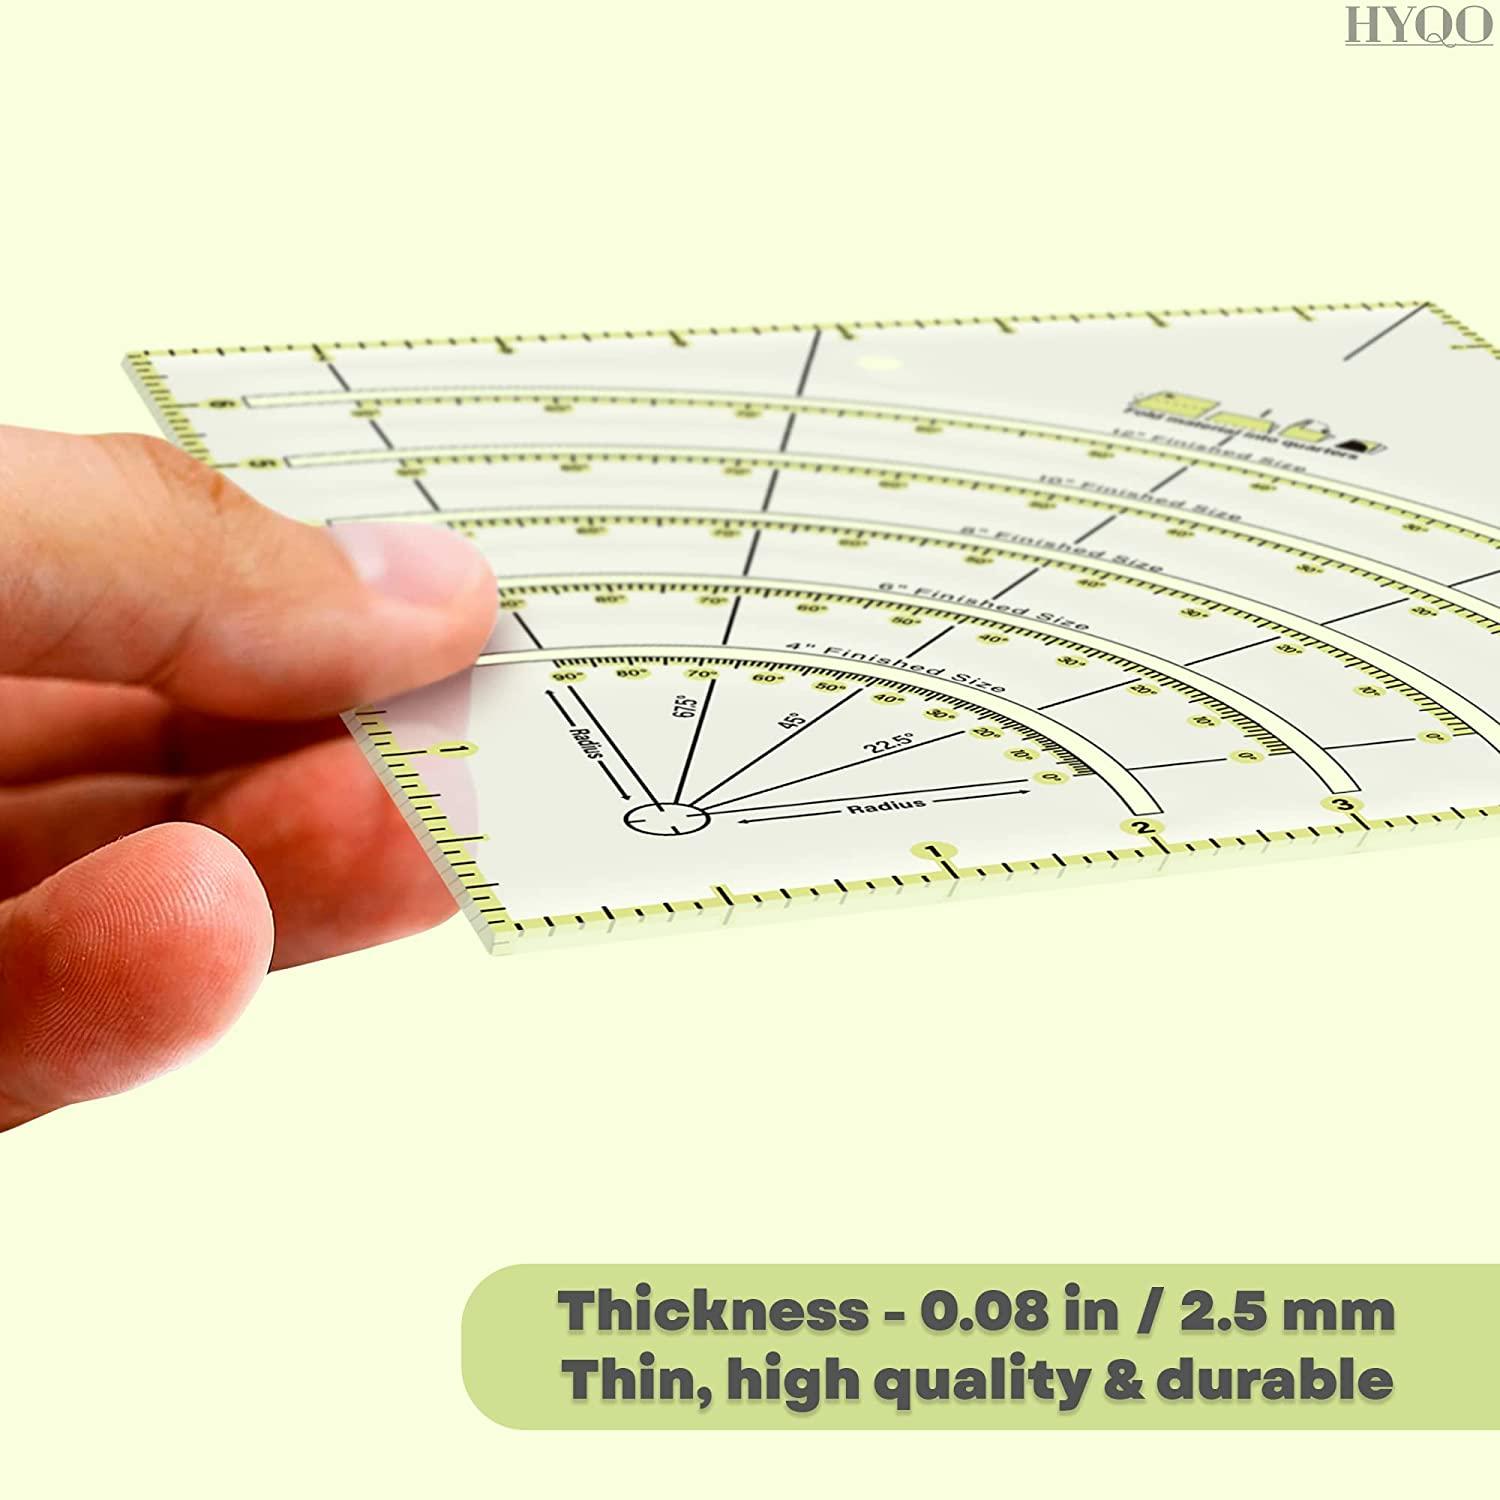  5 in 1 Quilt Cutting Ruler Stripology Squared Quilt Ruler  Non-Slip Acrylic Quilting Rulers and Templates Sewing Ruler Fabric Cutting  Ruler for Quilting Sewing & Crafts Template (Color : 12inch) 